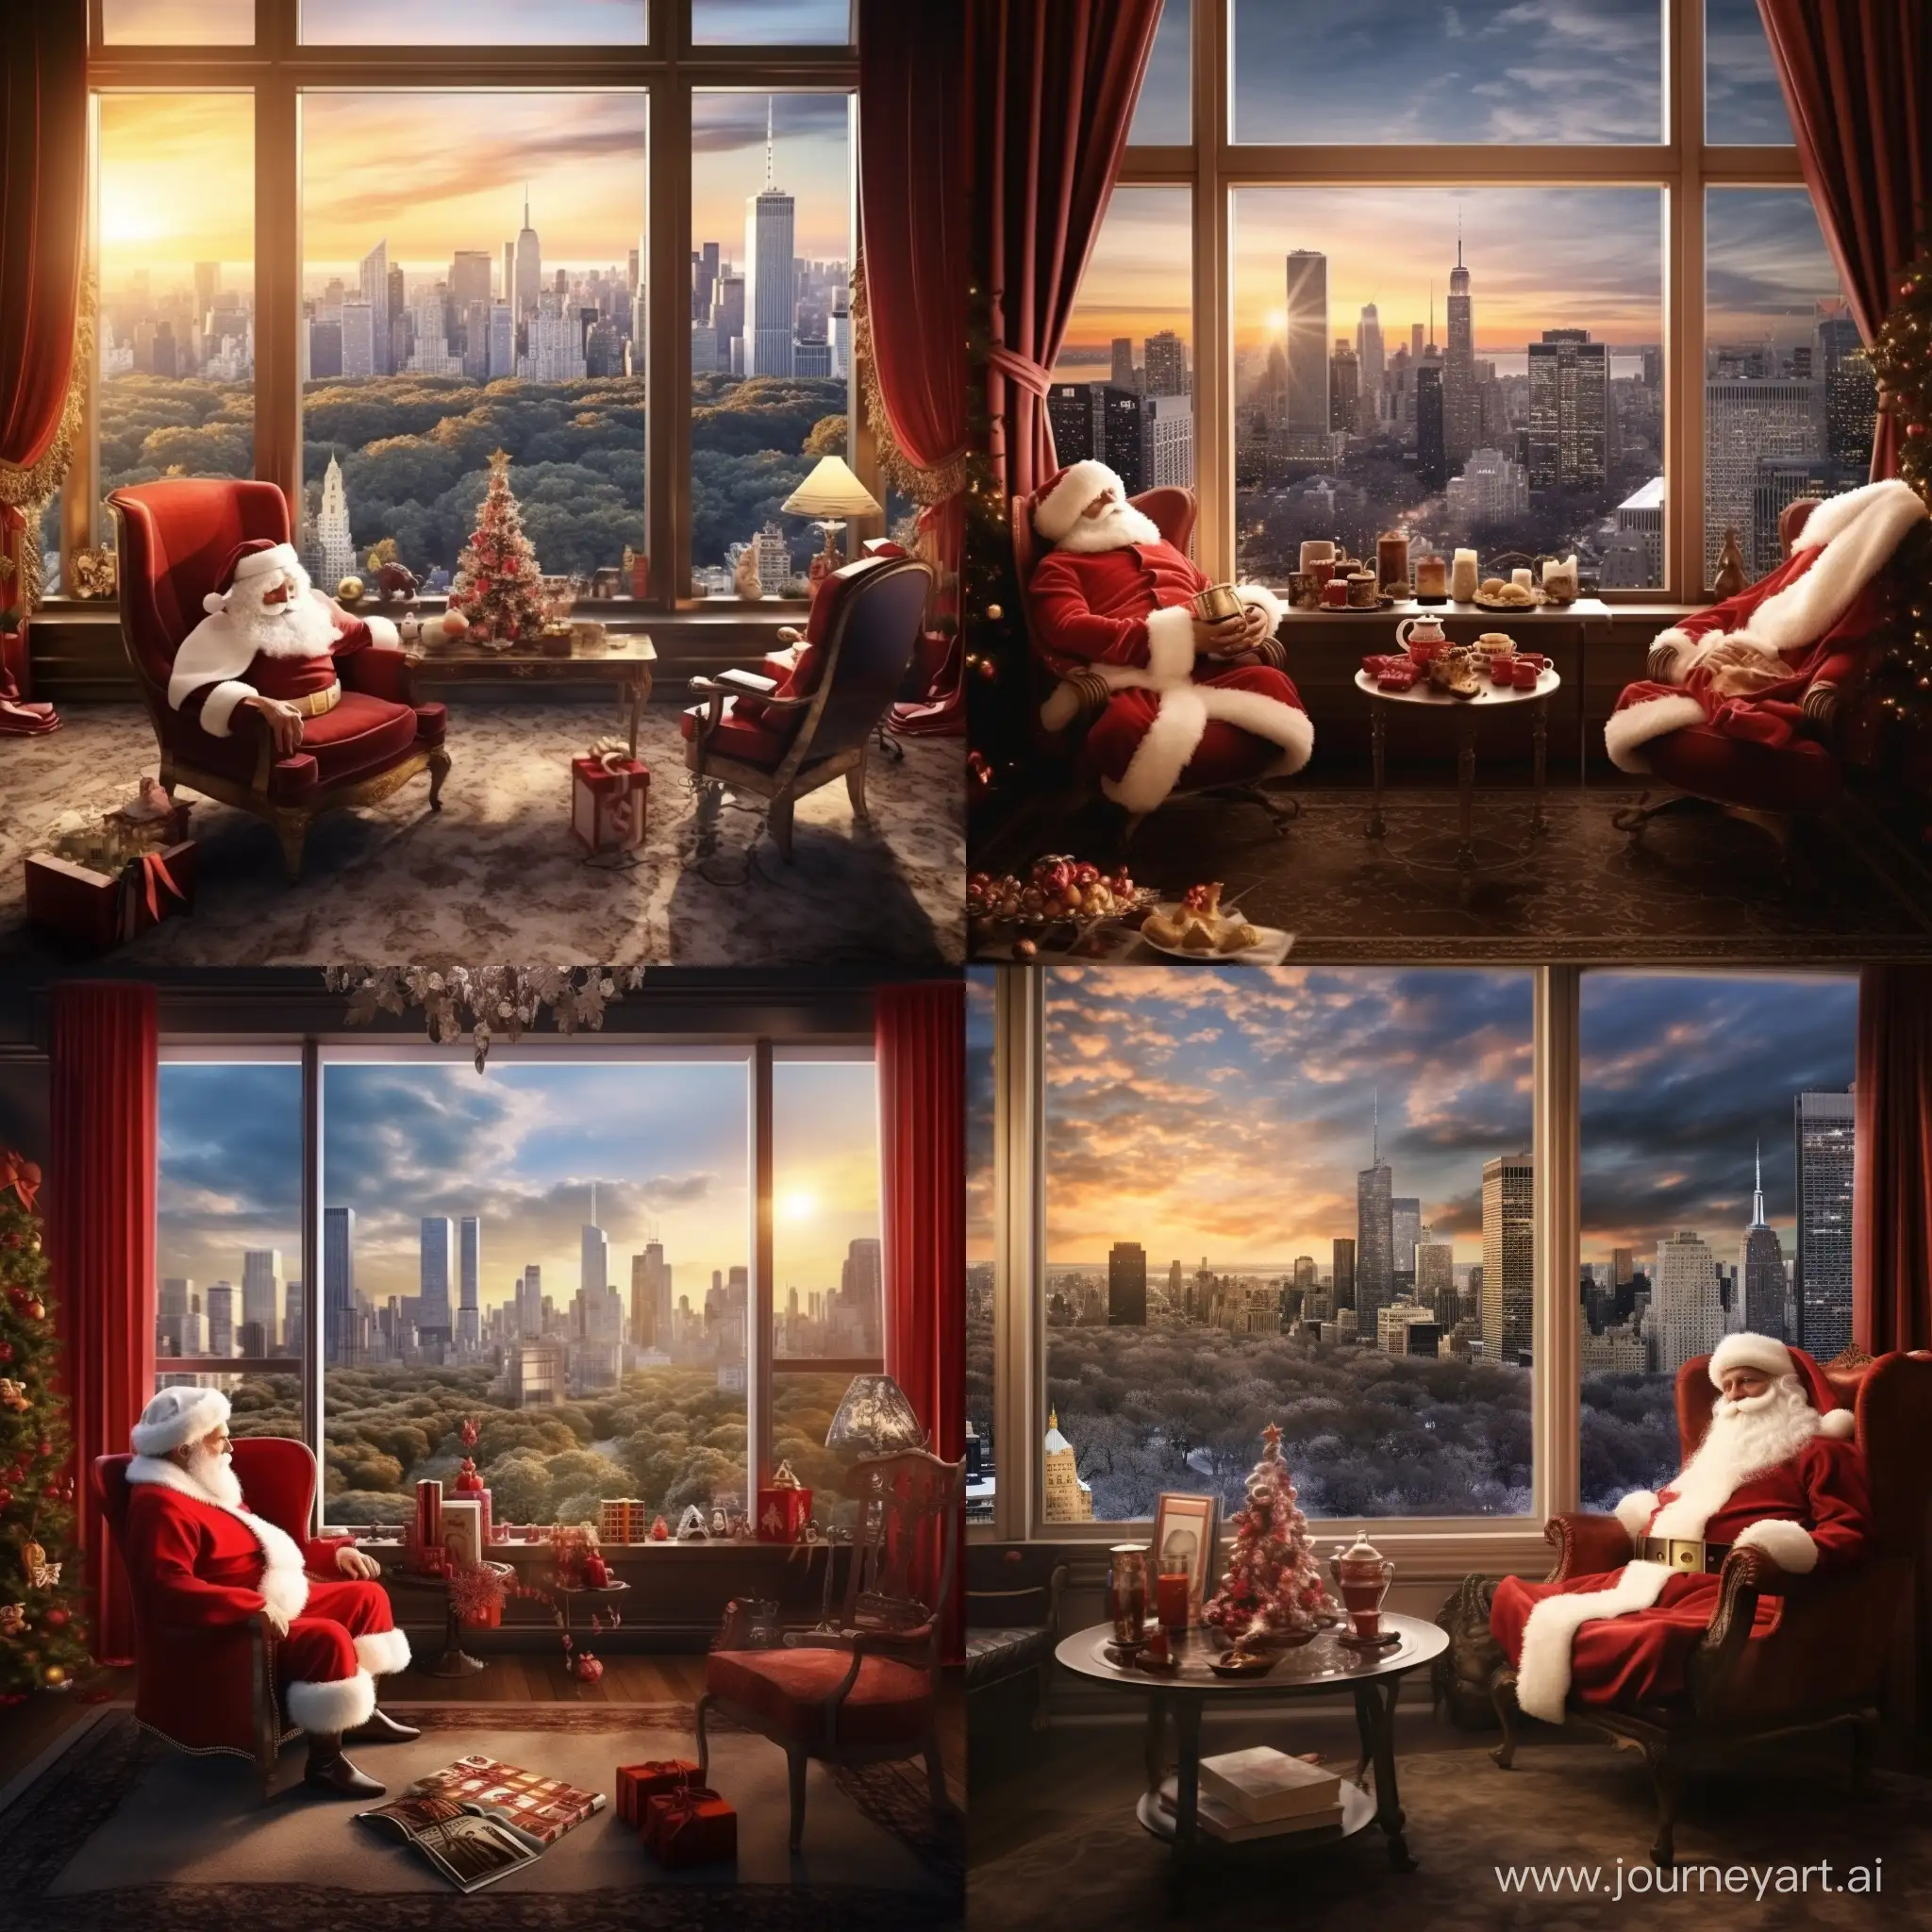 Santa Claus is sitting on an armchair near the fireplace behind a large panoramic window overlooking Central Park in Manhattan hyperrealistic zoom